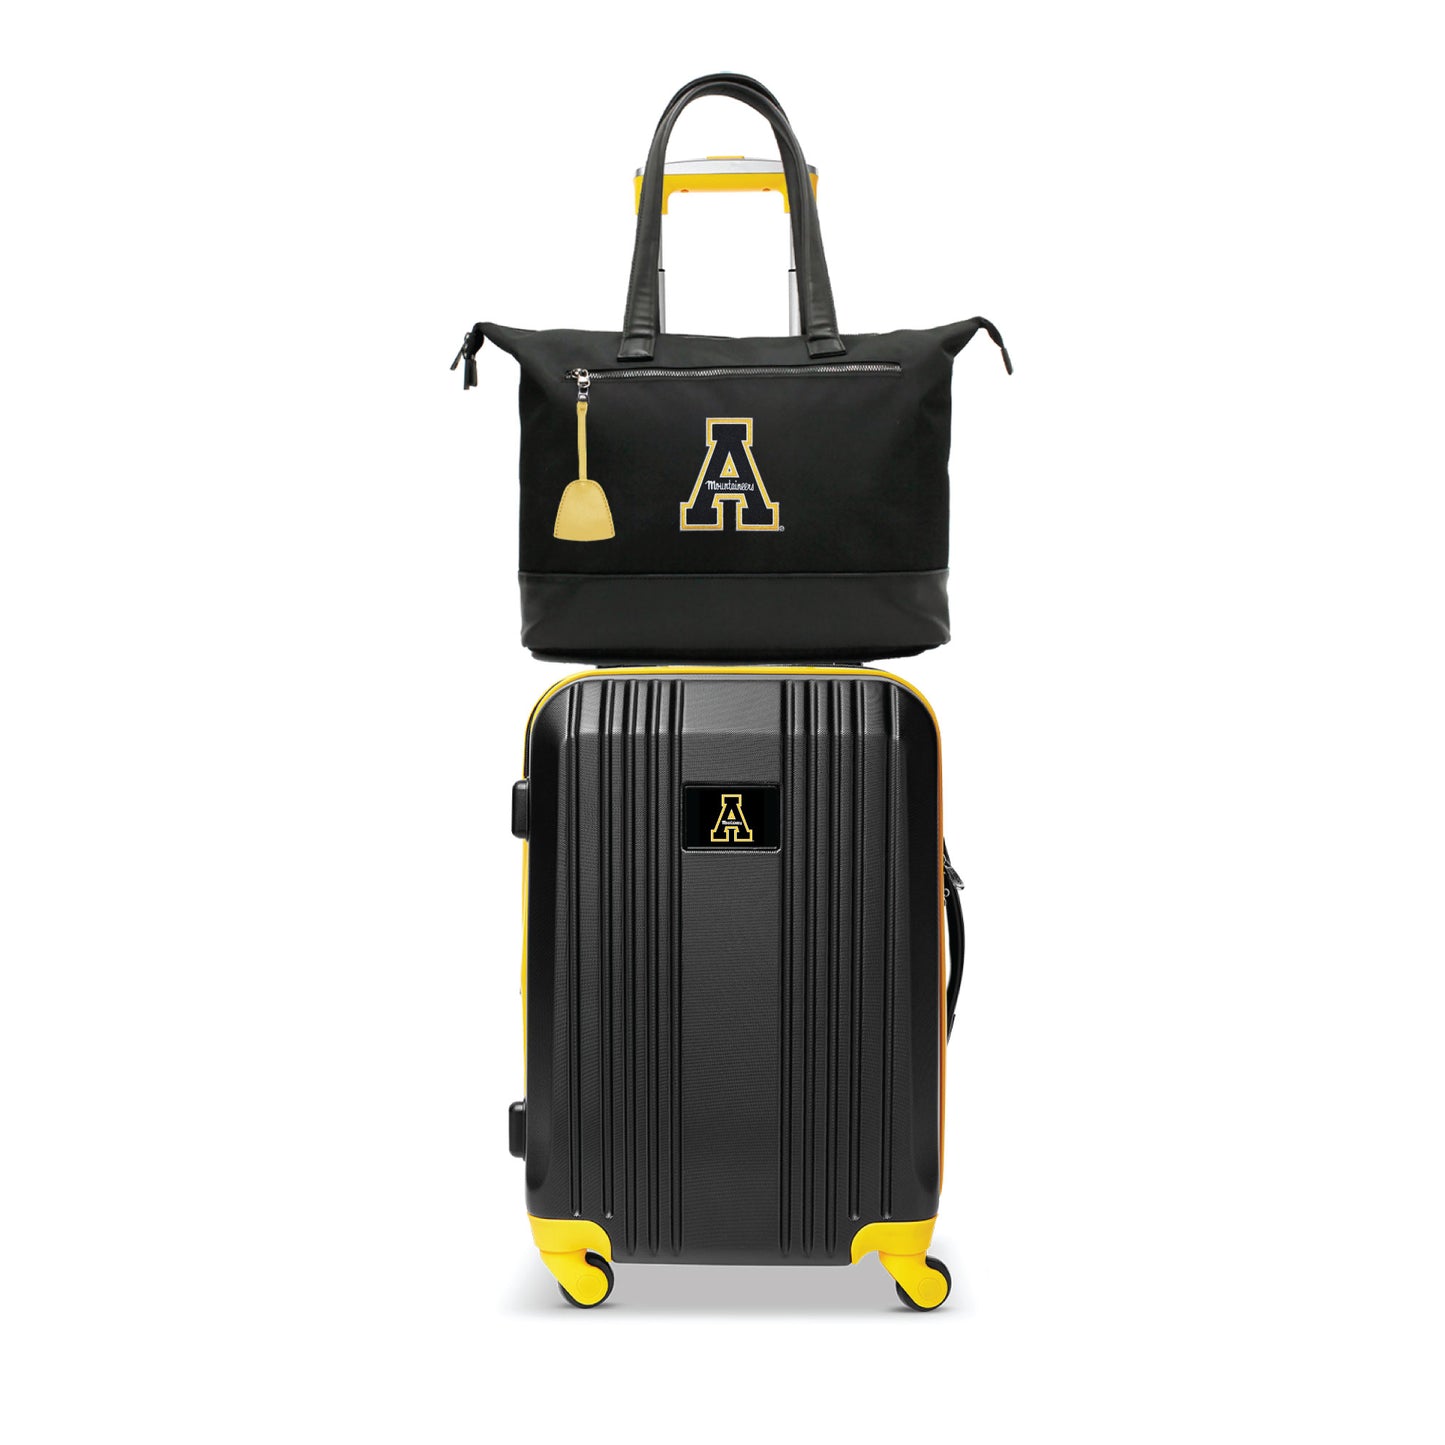 Appalachian State Mountaineers Premium Laptop Tote Bag and Luggage Set